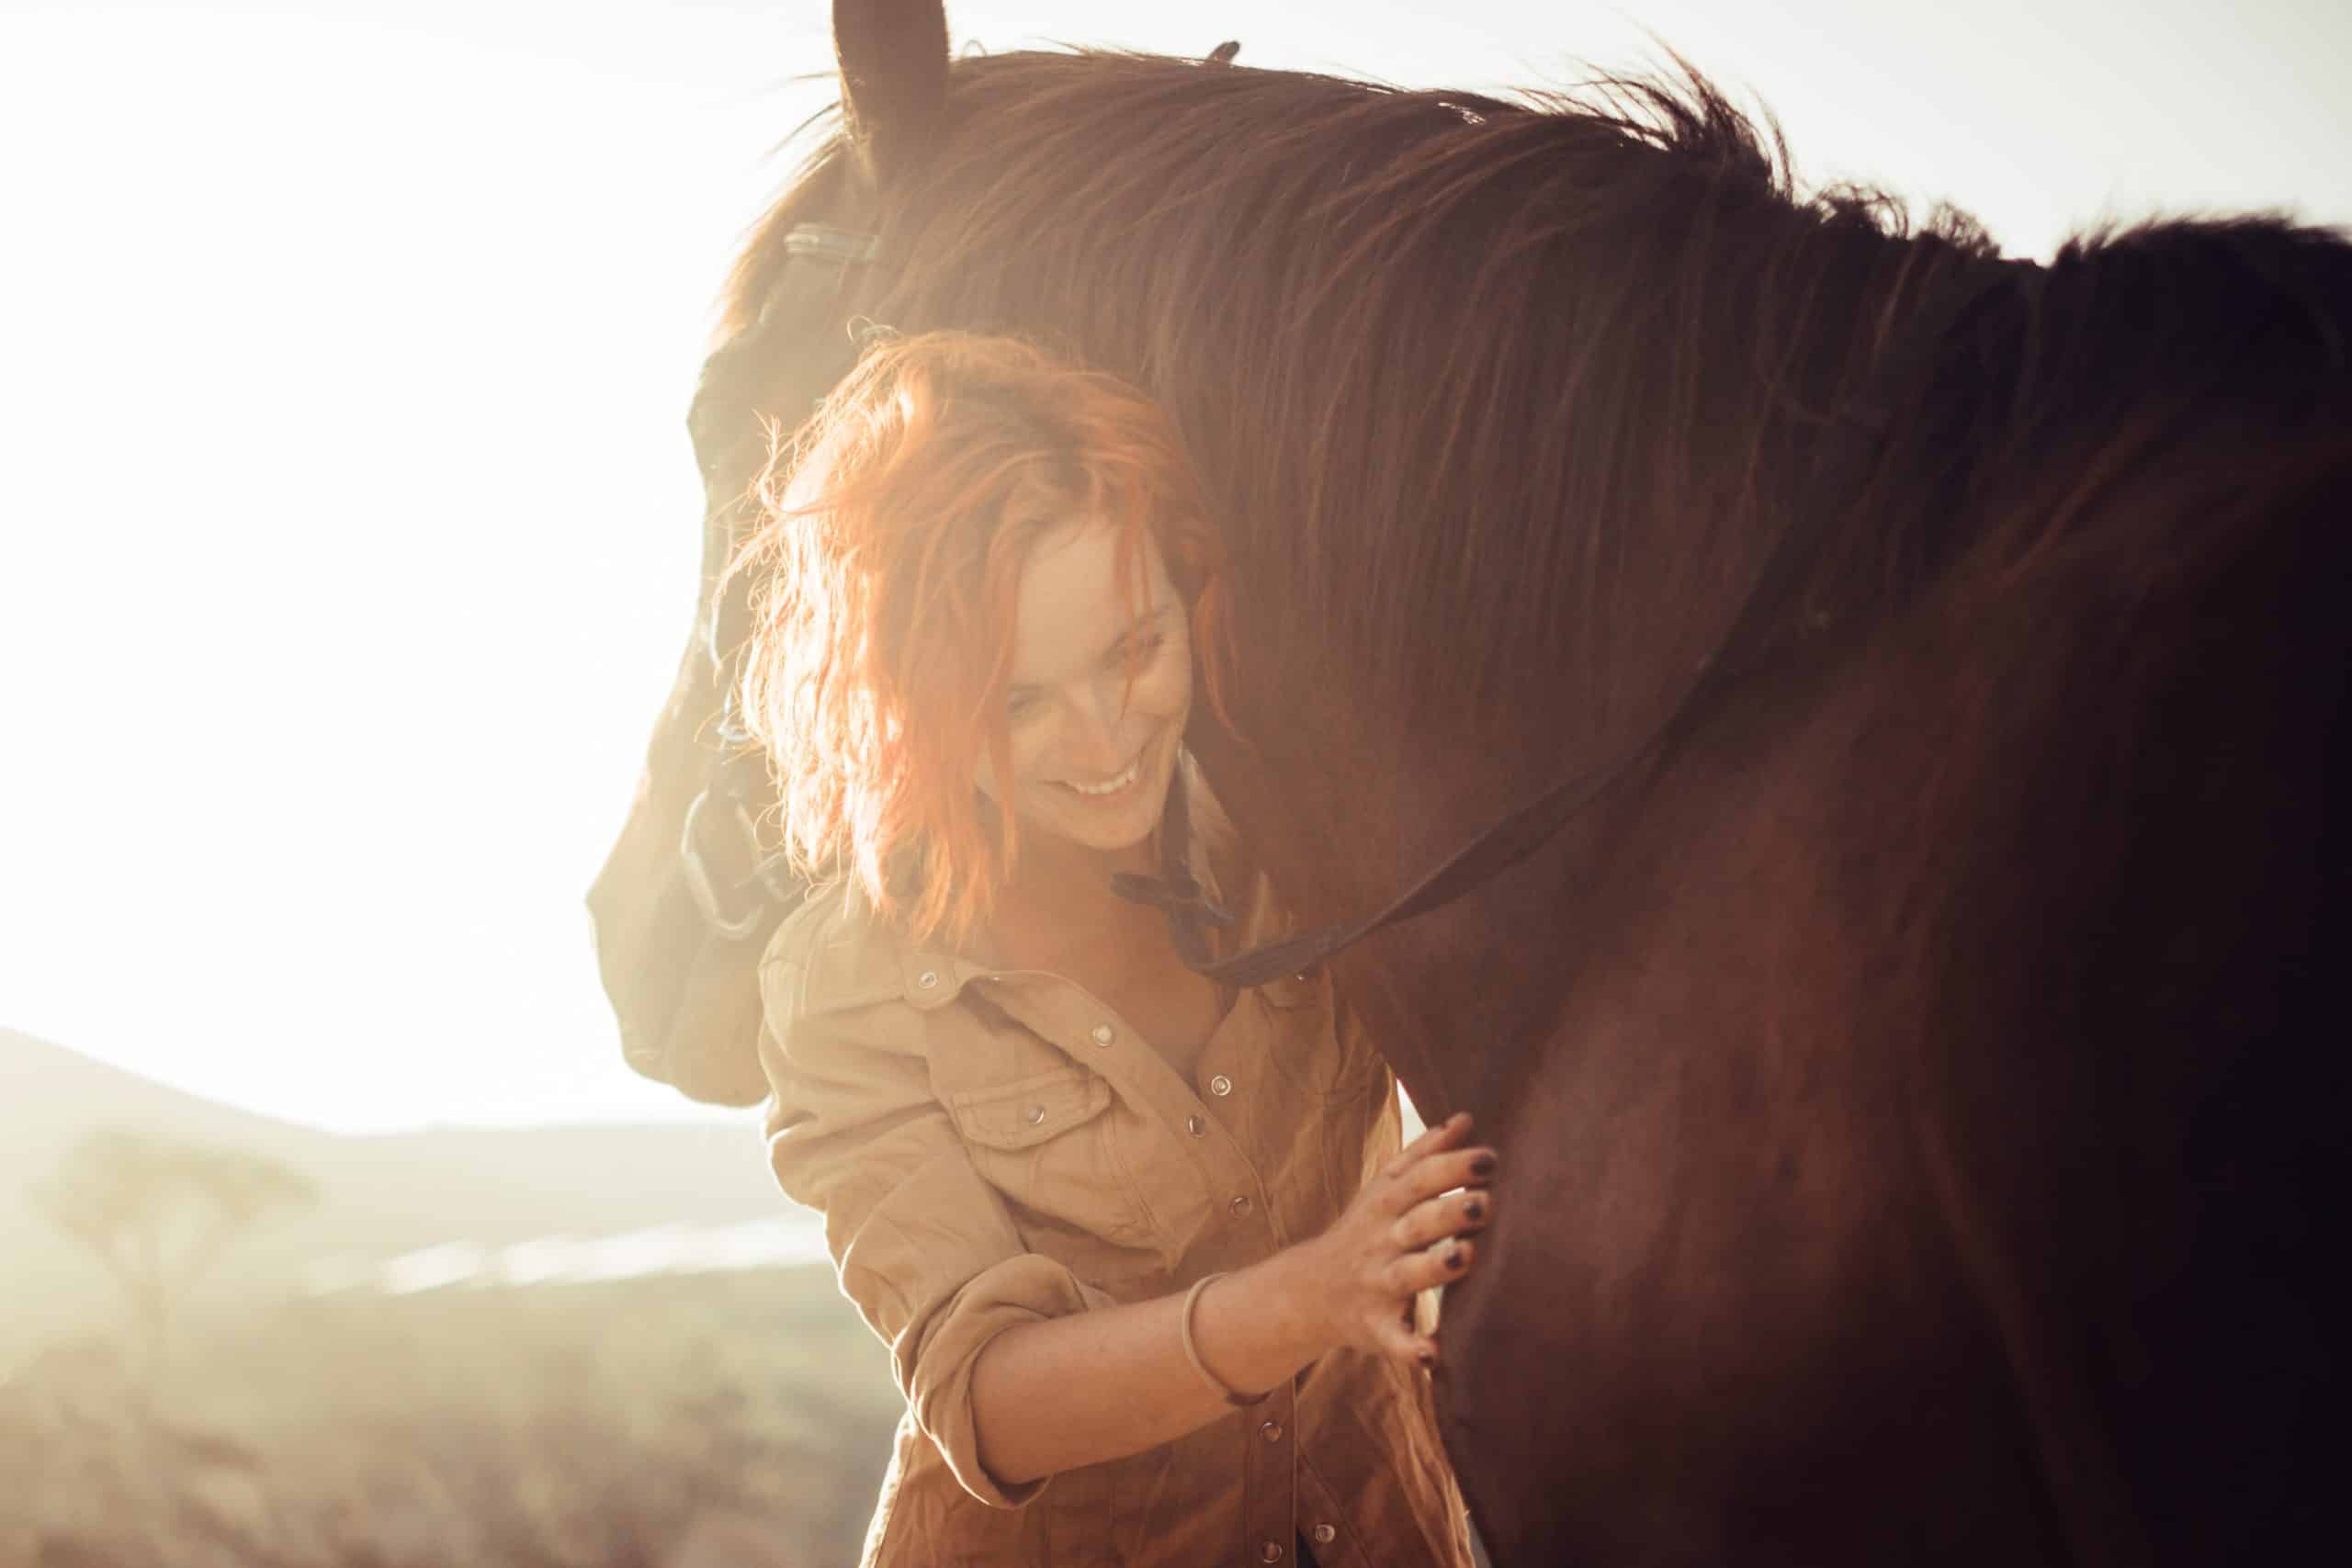 real love and friendship concept between nice beautiful caucasian lady and amazing horse. sunset time and backlight. sweetness and tenderness in horses therapy.